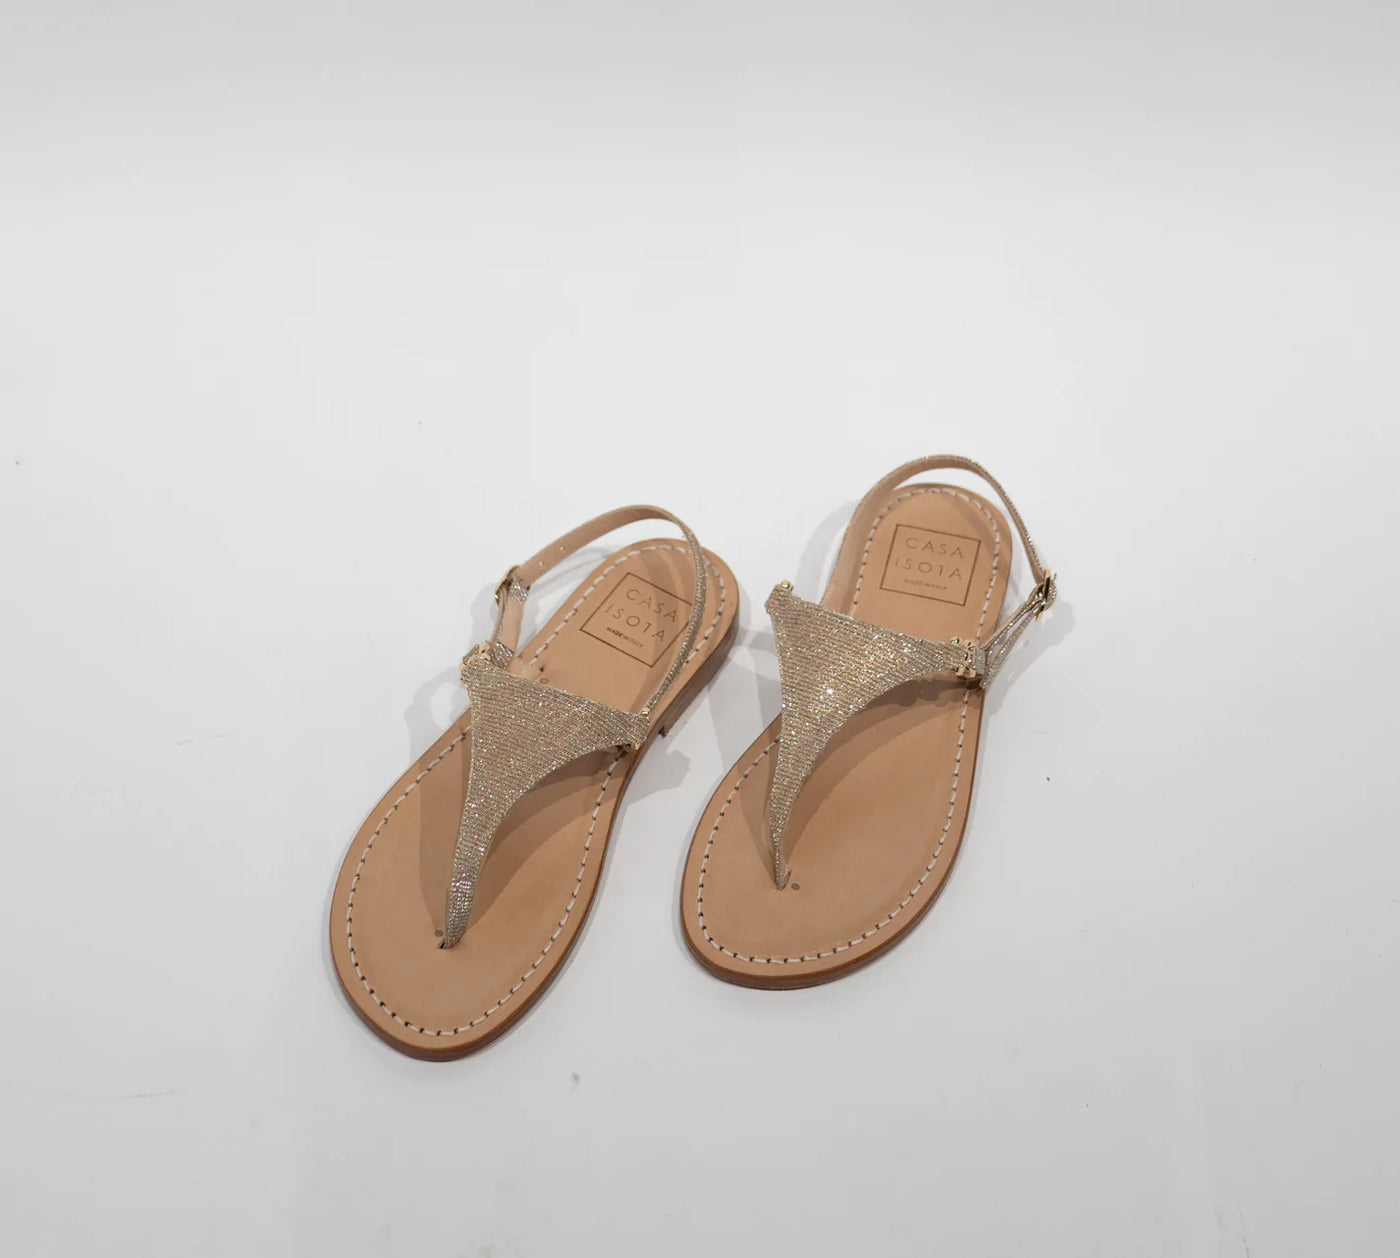 PROCIDA SANDAL - More Colors Available